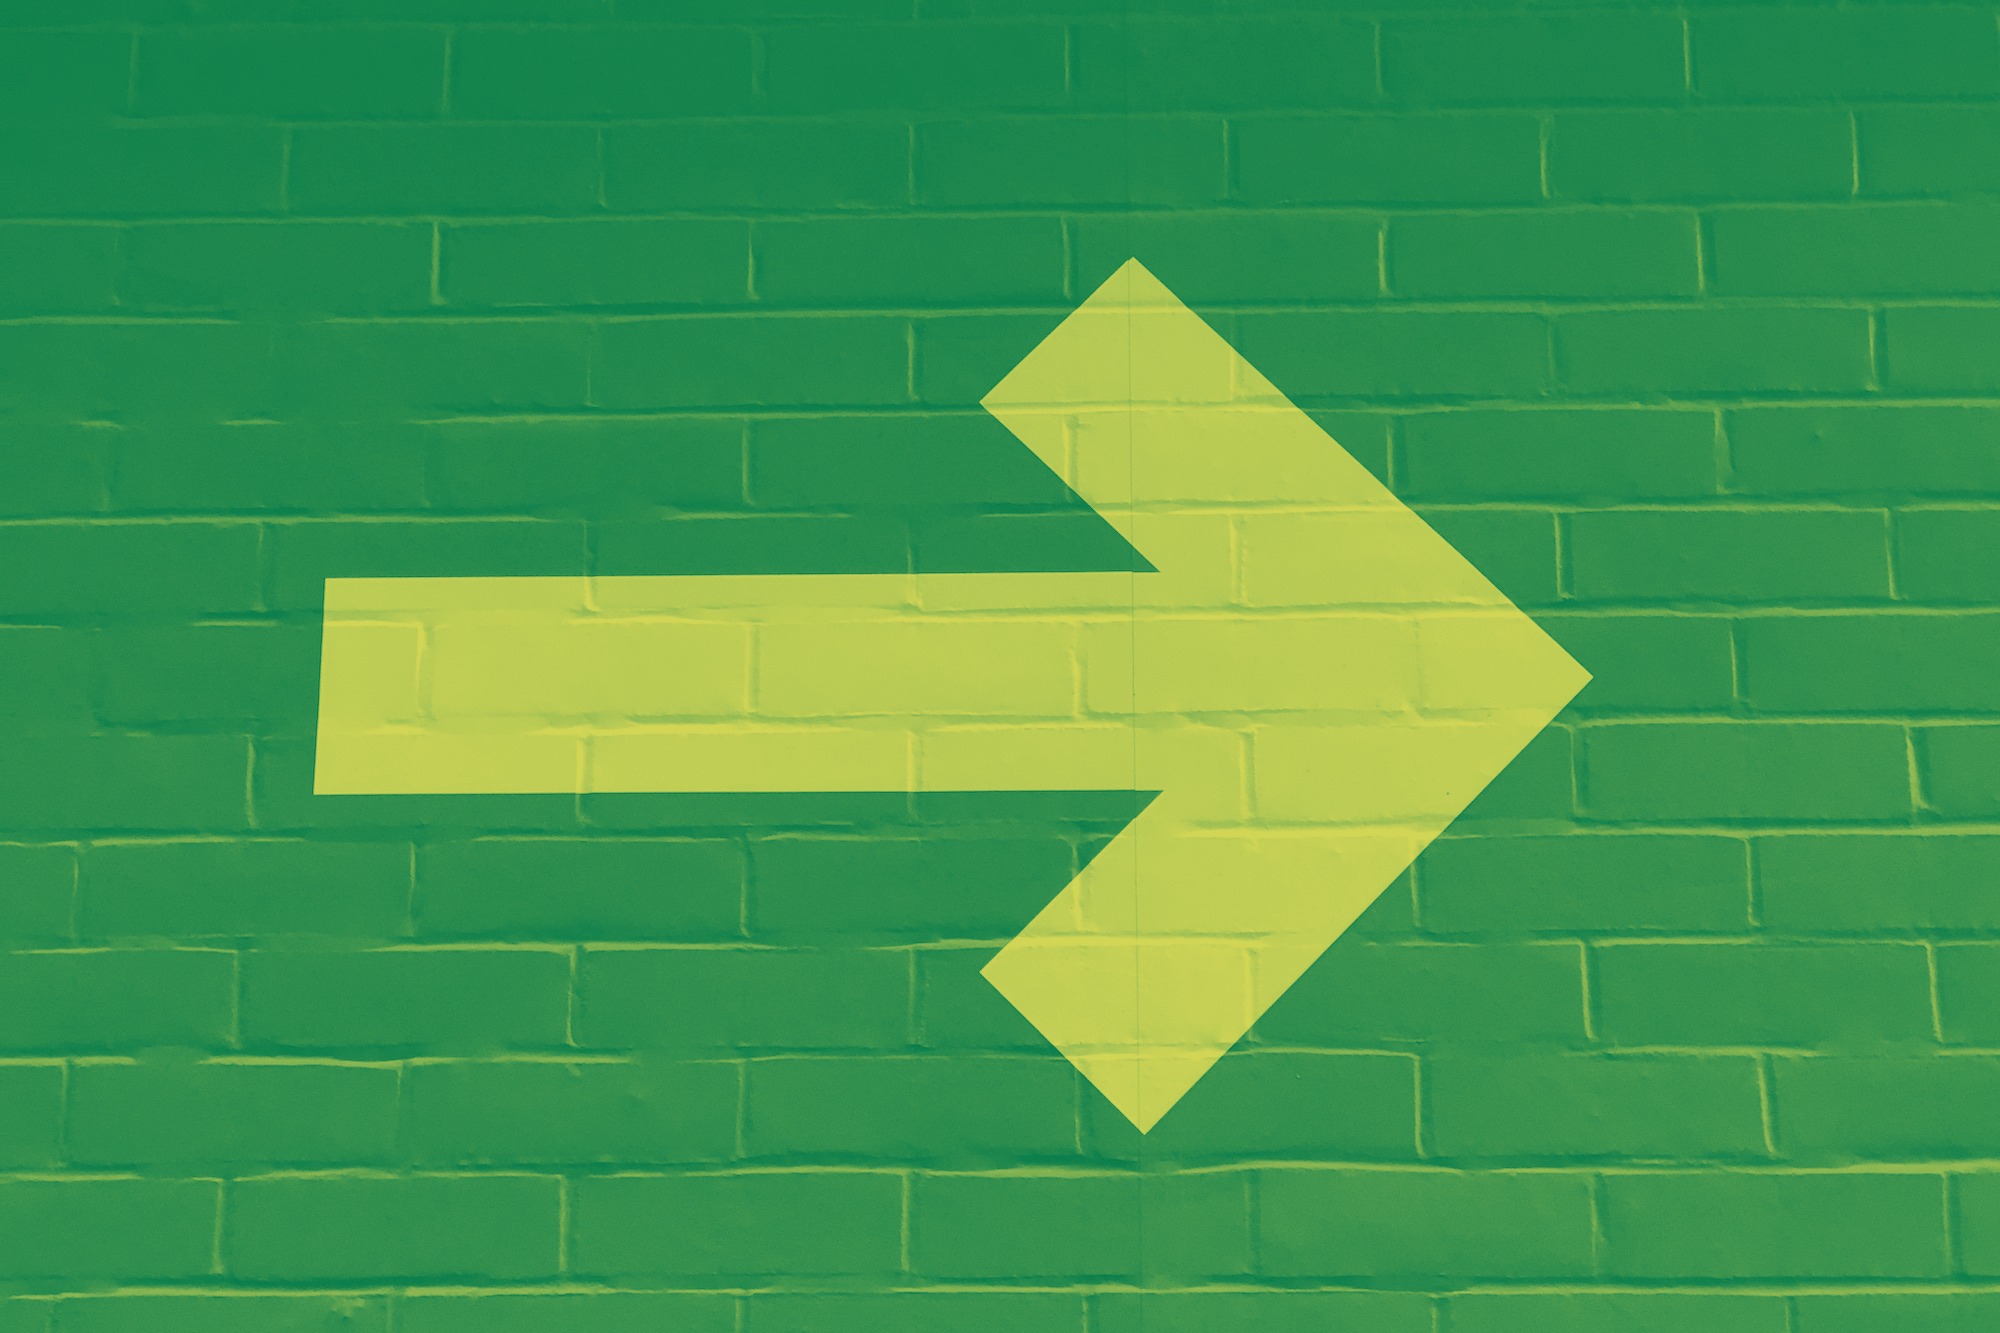 A yellow arrow pointing toward the right, against a green background.